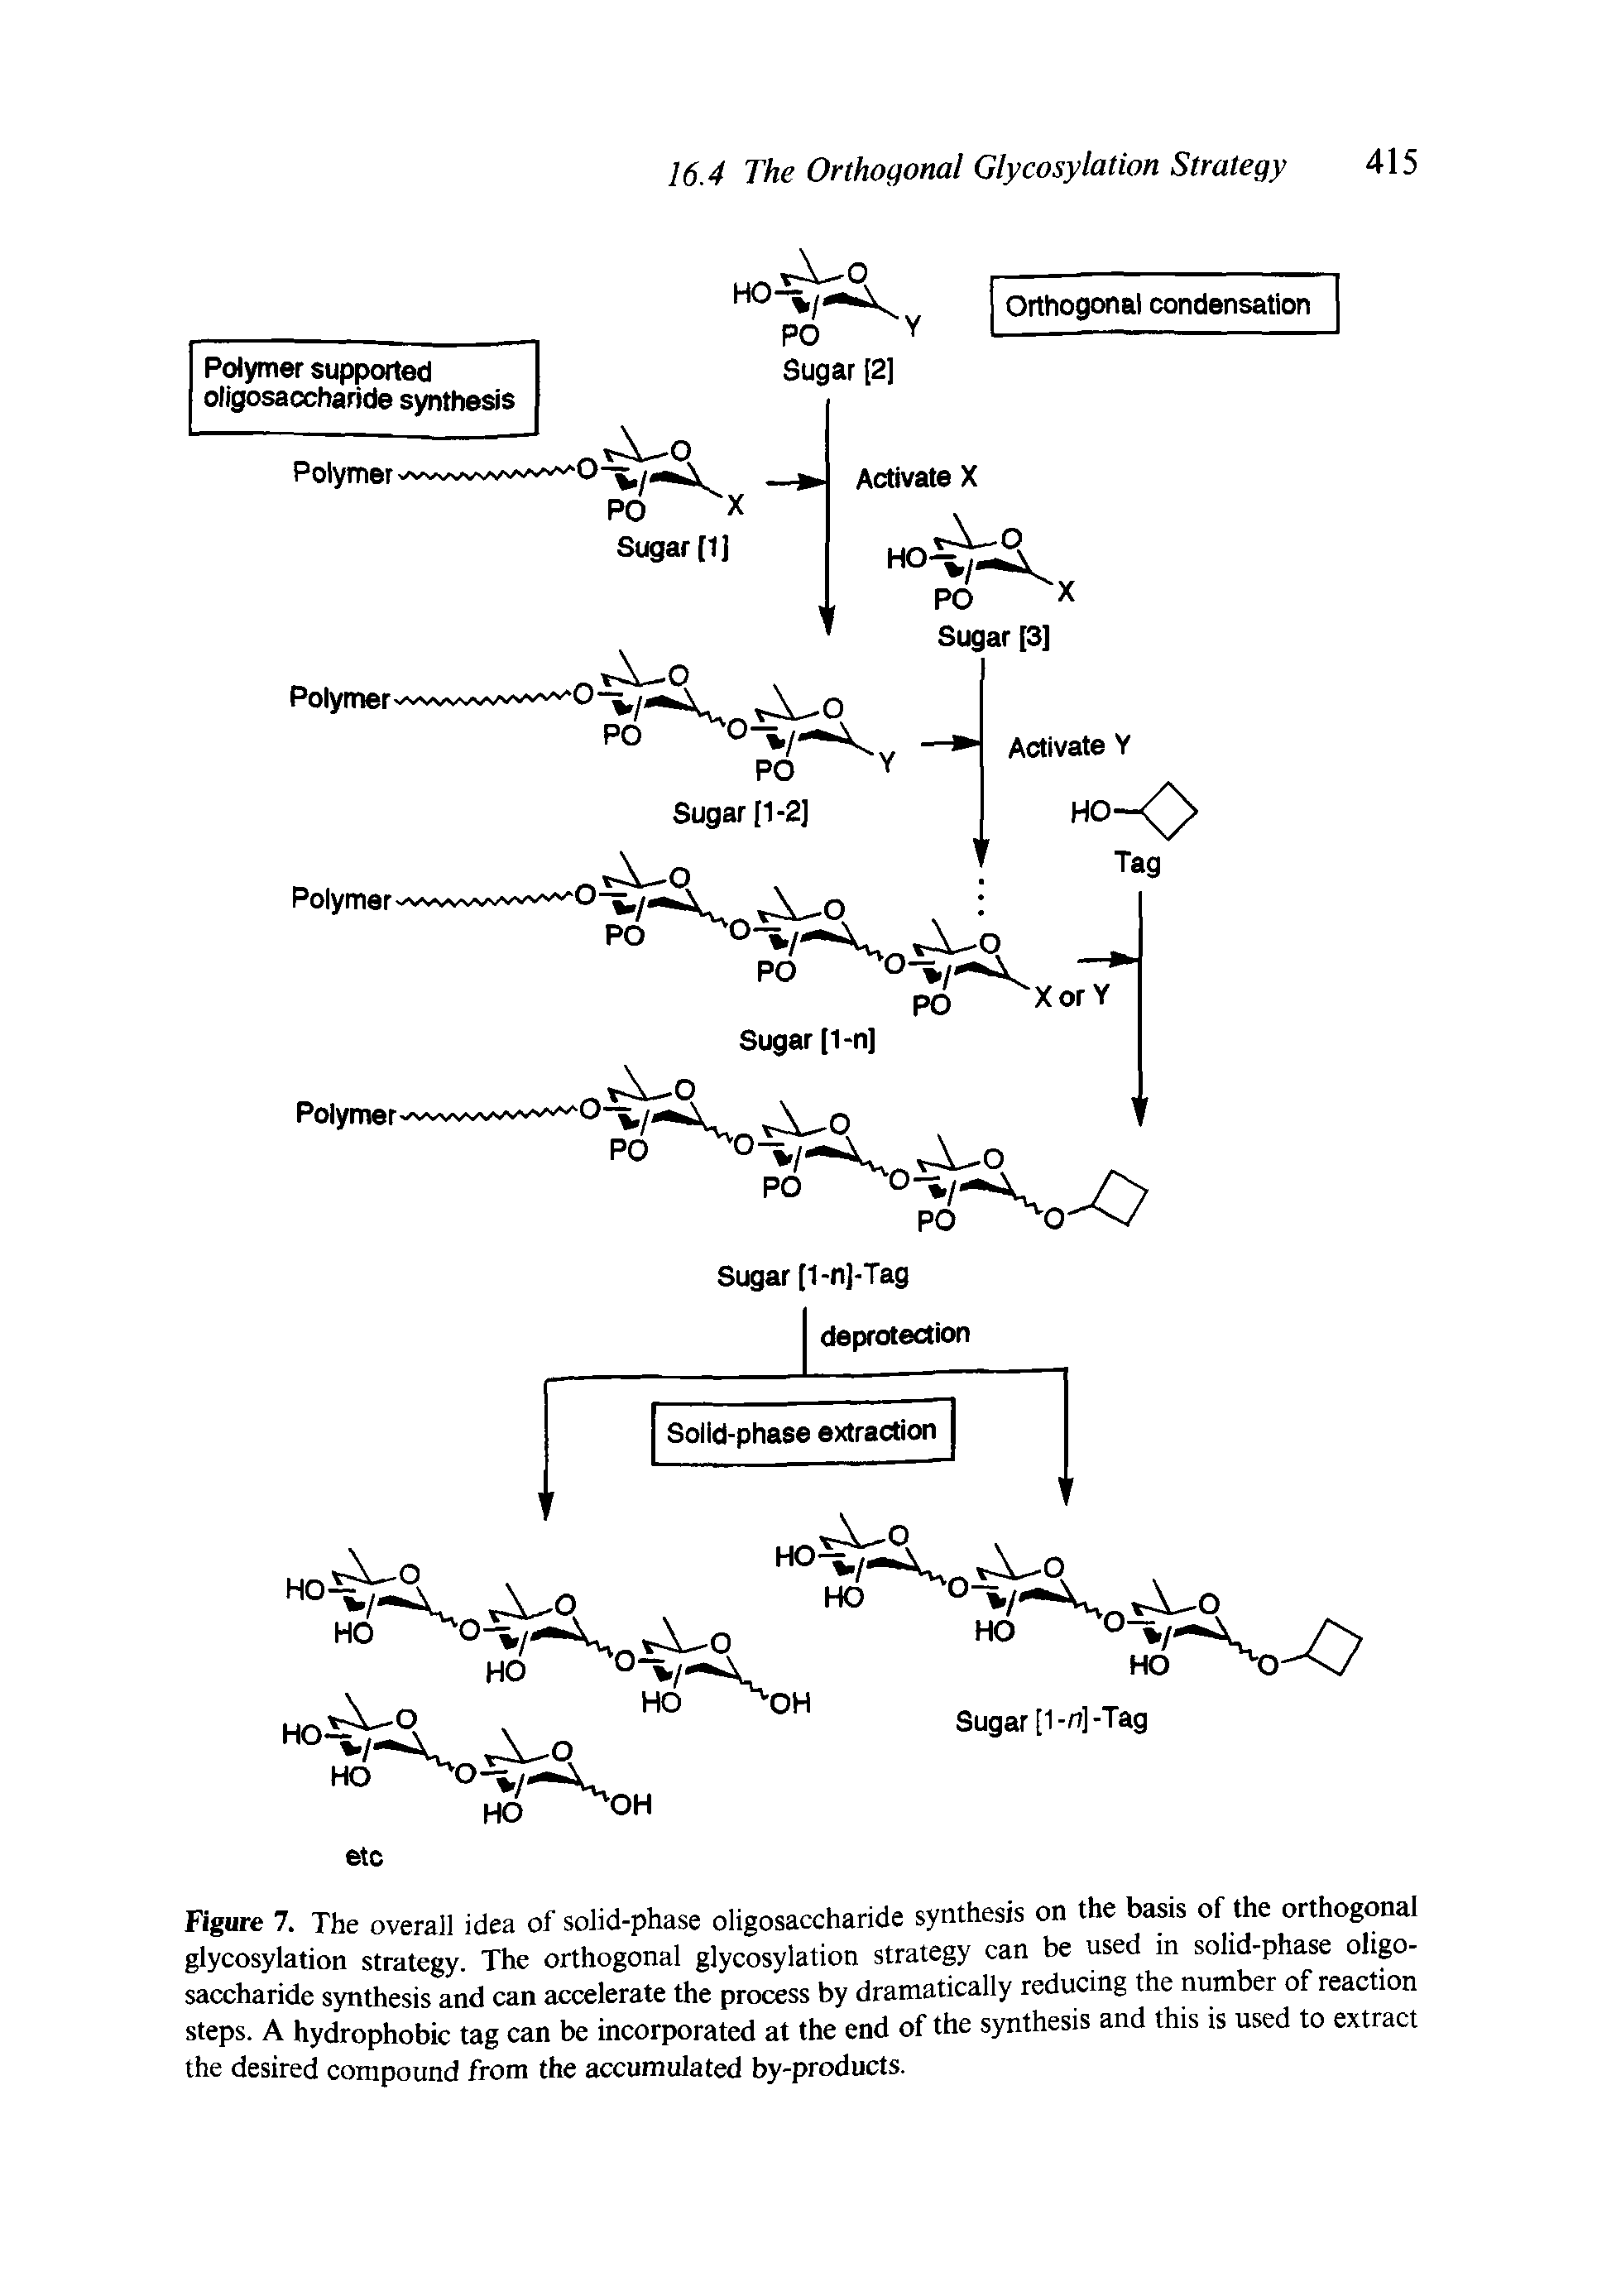 Figure 7. The overall idea of solid-phase oligosaccharide synthesis on the basis of the orthogonal glycosylation strategy. The orthogonal glycosylation strategy can be used m solid-phase olip-saccharide synthesis and can accelerate the process by dramatically reducing the number of reaction steps. A hydrophobic tag can be incorporated at the end of the synthesis and this is used to extract the desired compound from the accumulated by-products.